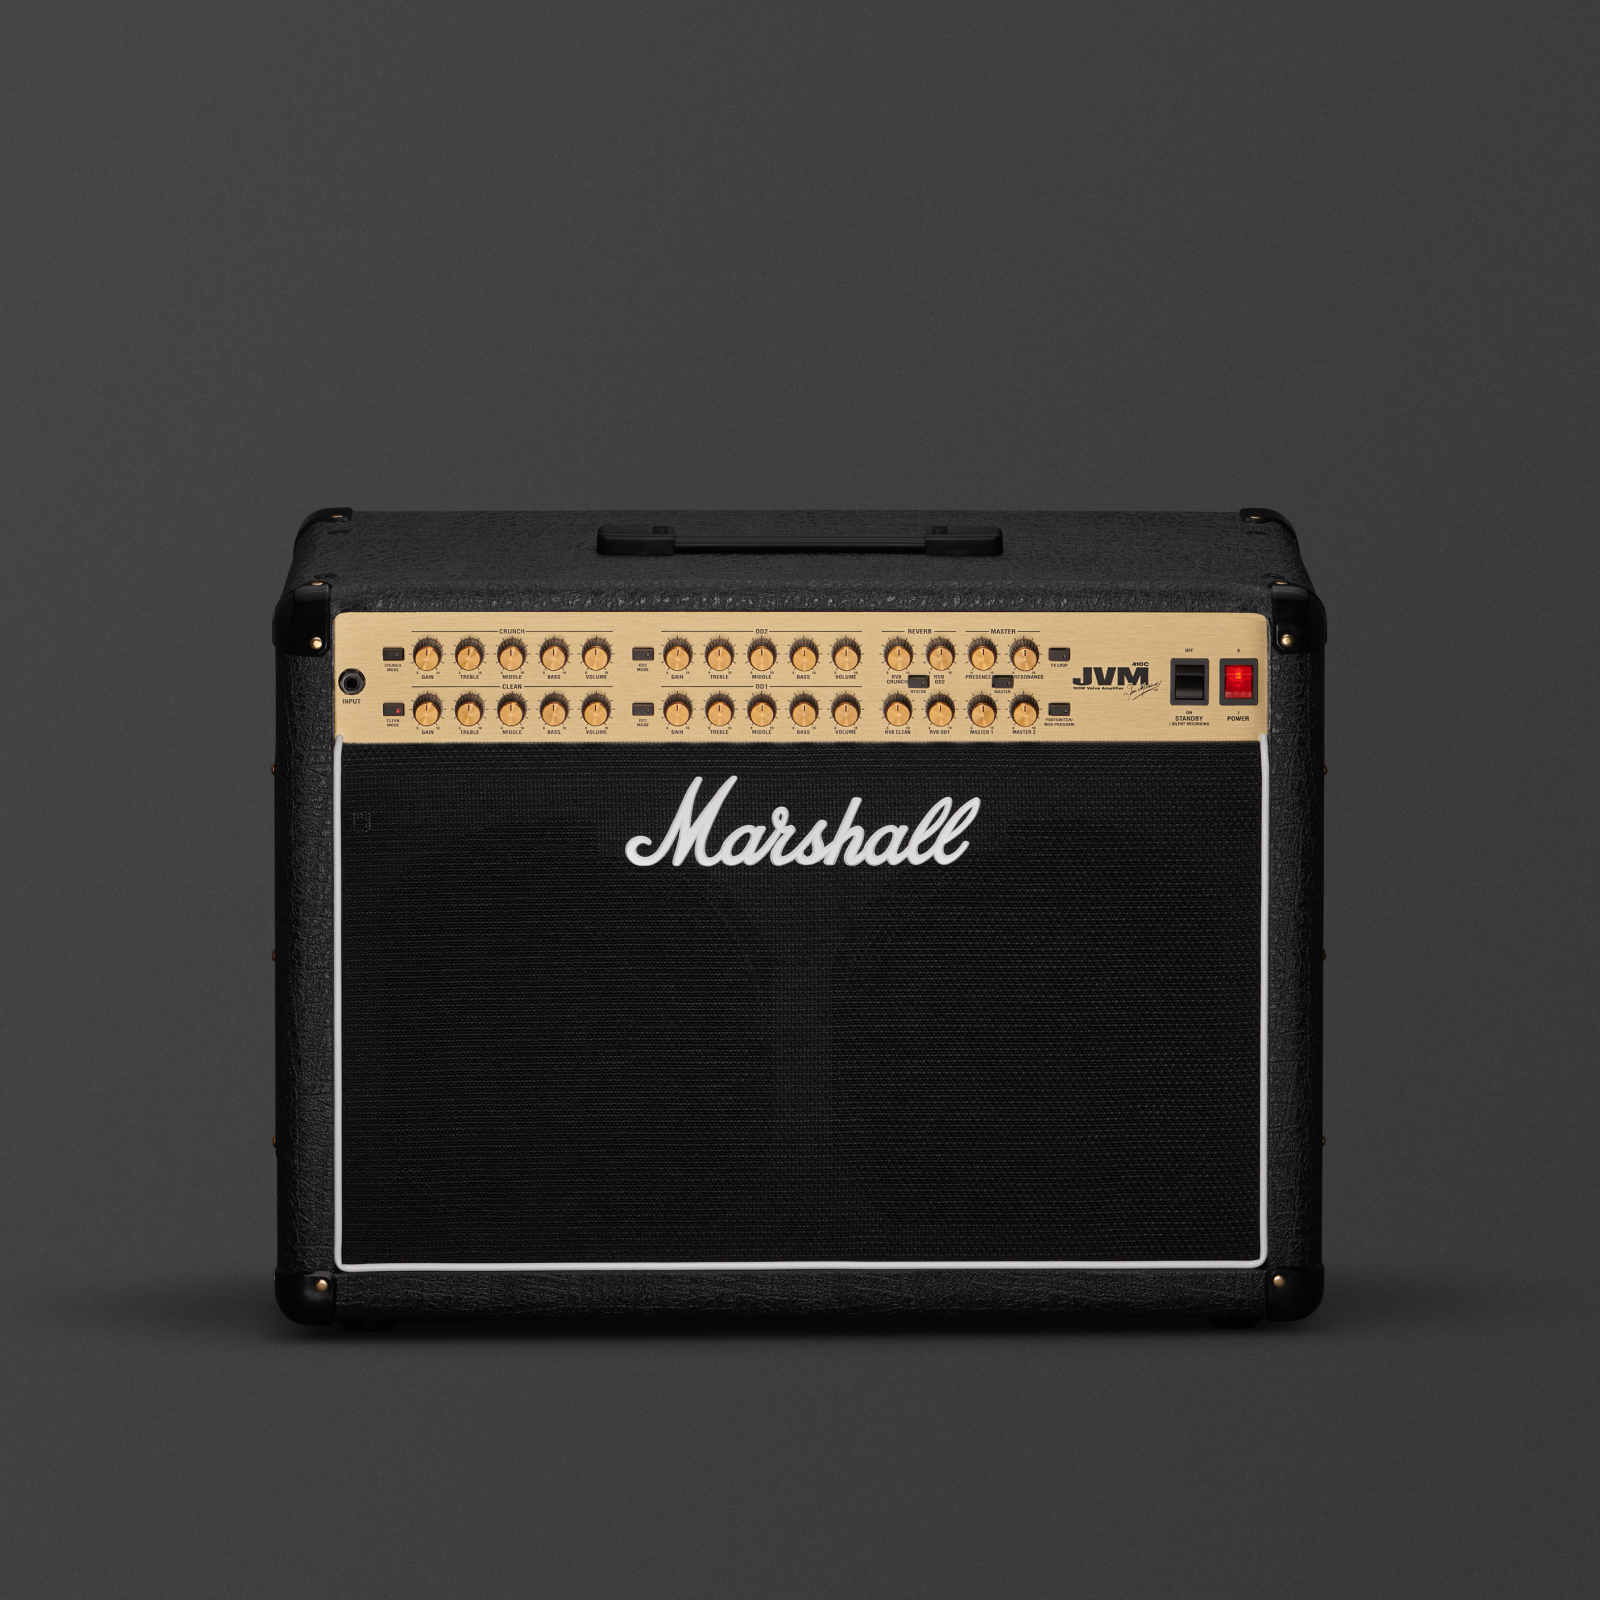 Combo amplifiers: Unleash your guitar's potential | Marshall.com